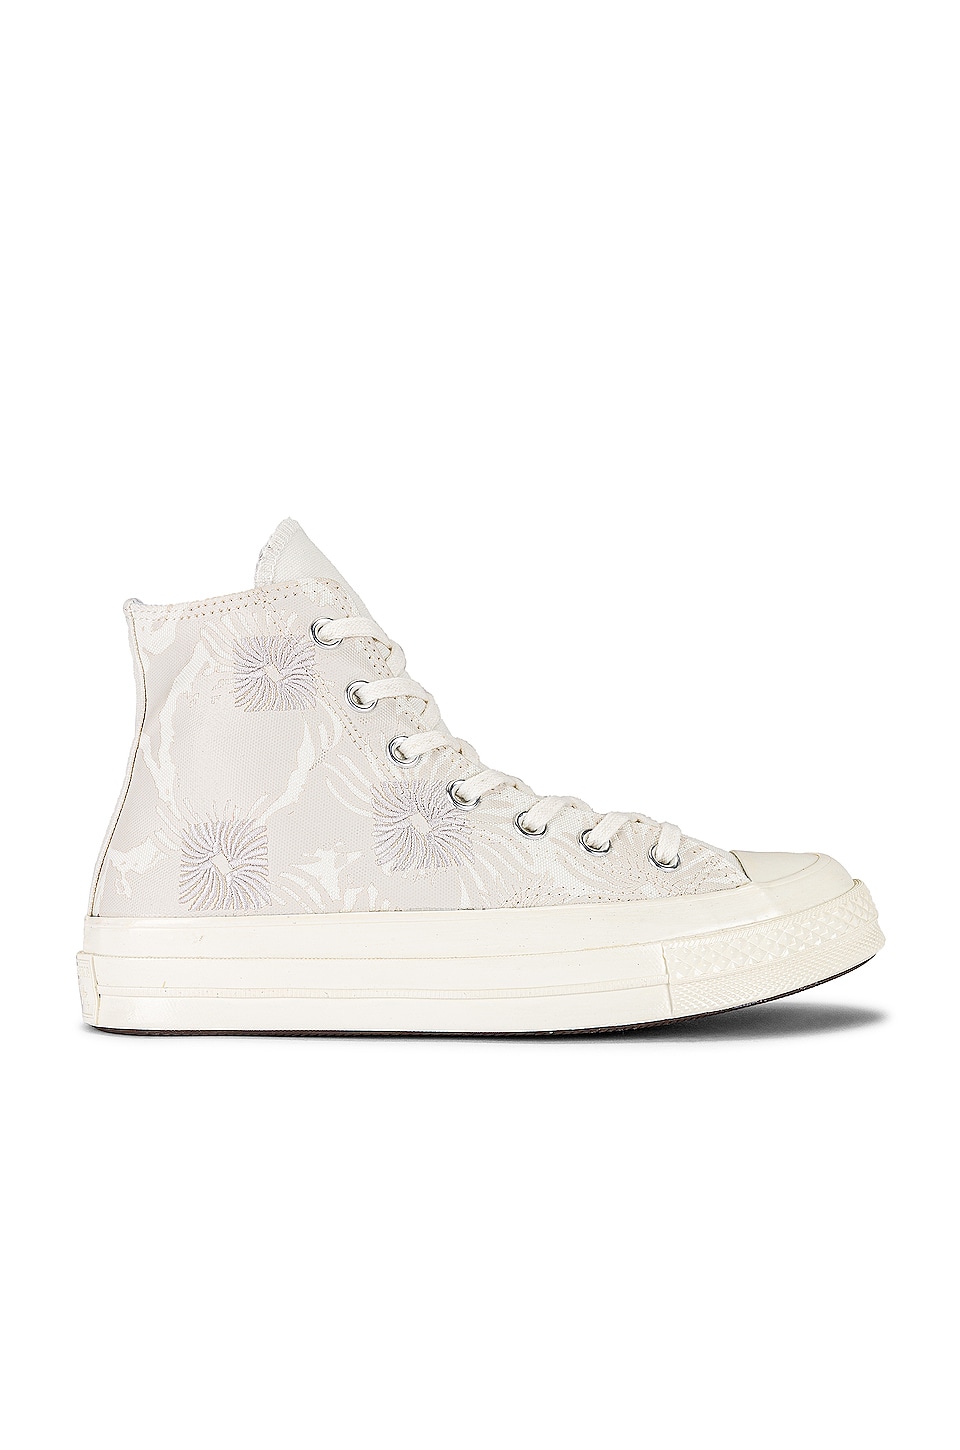 Кроссовки Converse Chuck 70 Graphic, цвет Egret, Ghosted, & Pale Putty barr emily ghosted